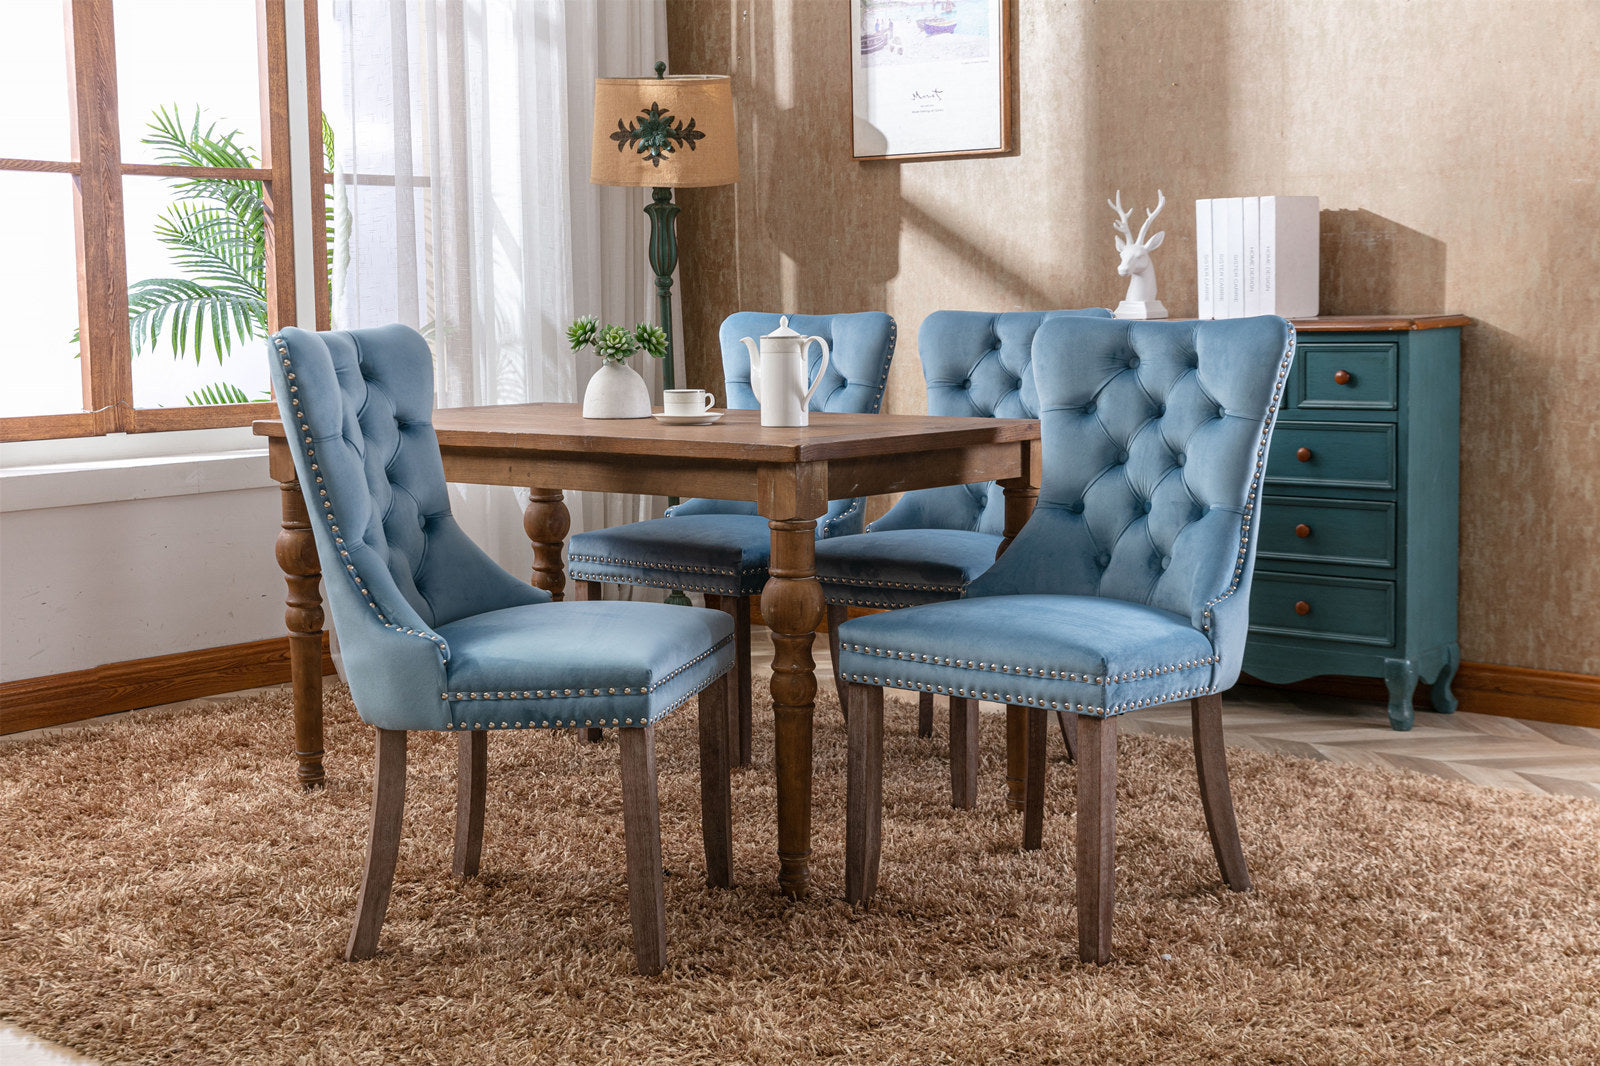 High-end Tufted Solid Wood Contemporary Velvet Upholstered Dining Chair with Wood Legs Nailhead Trim 2-Pcs Set, Light Blue